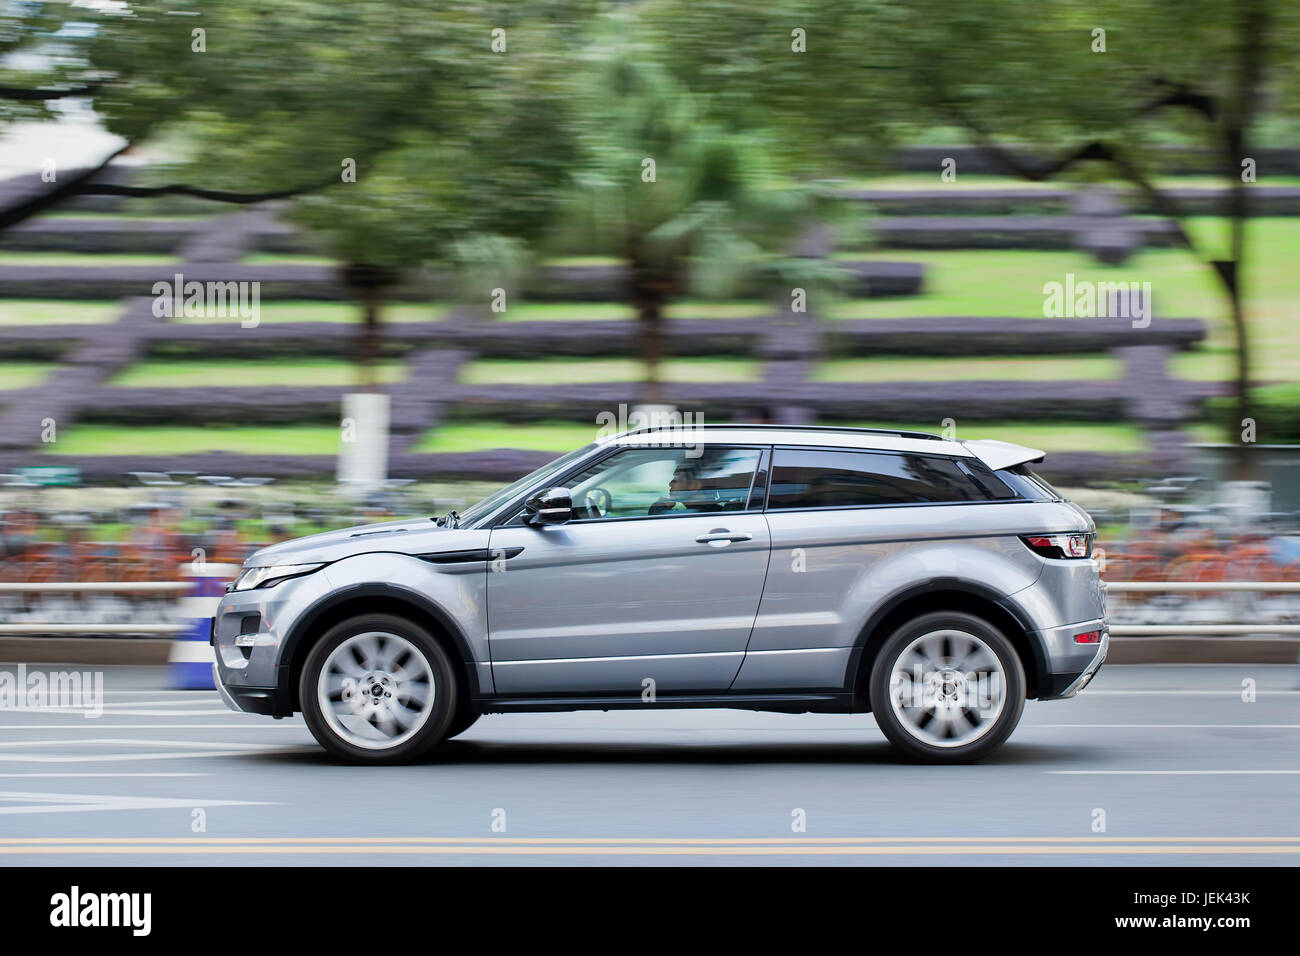 WENZHOU-CHINA-NOV. 19, 2014. Land Rover Evoque SUV downtown. Land Rover plans to complain to Chinese officials about (Landwind) copy of its Evoque SUV Stock Photo